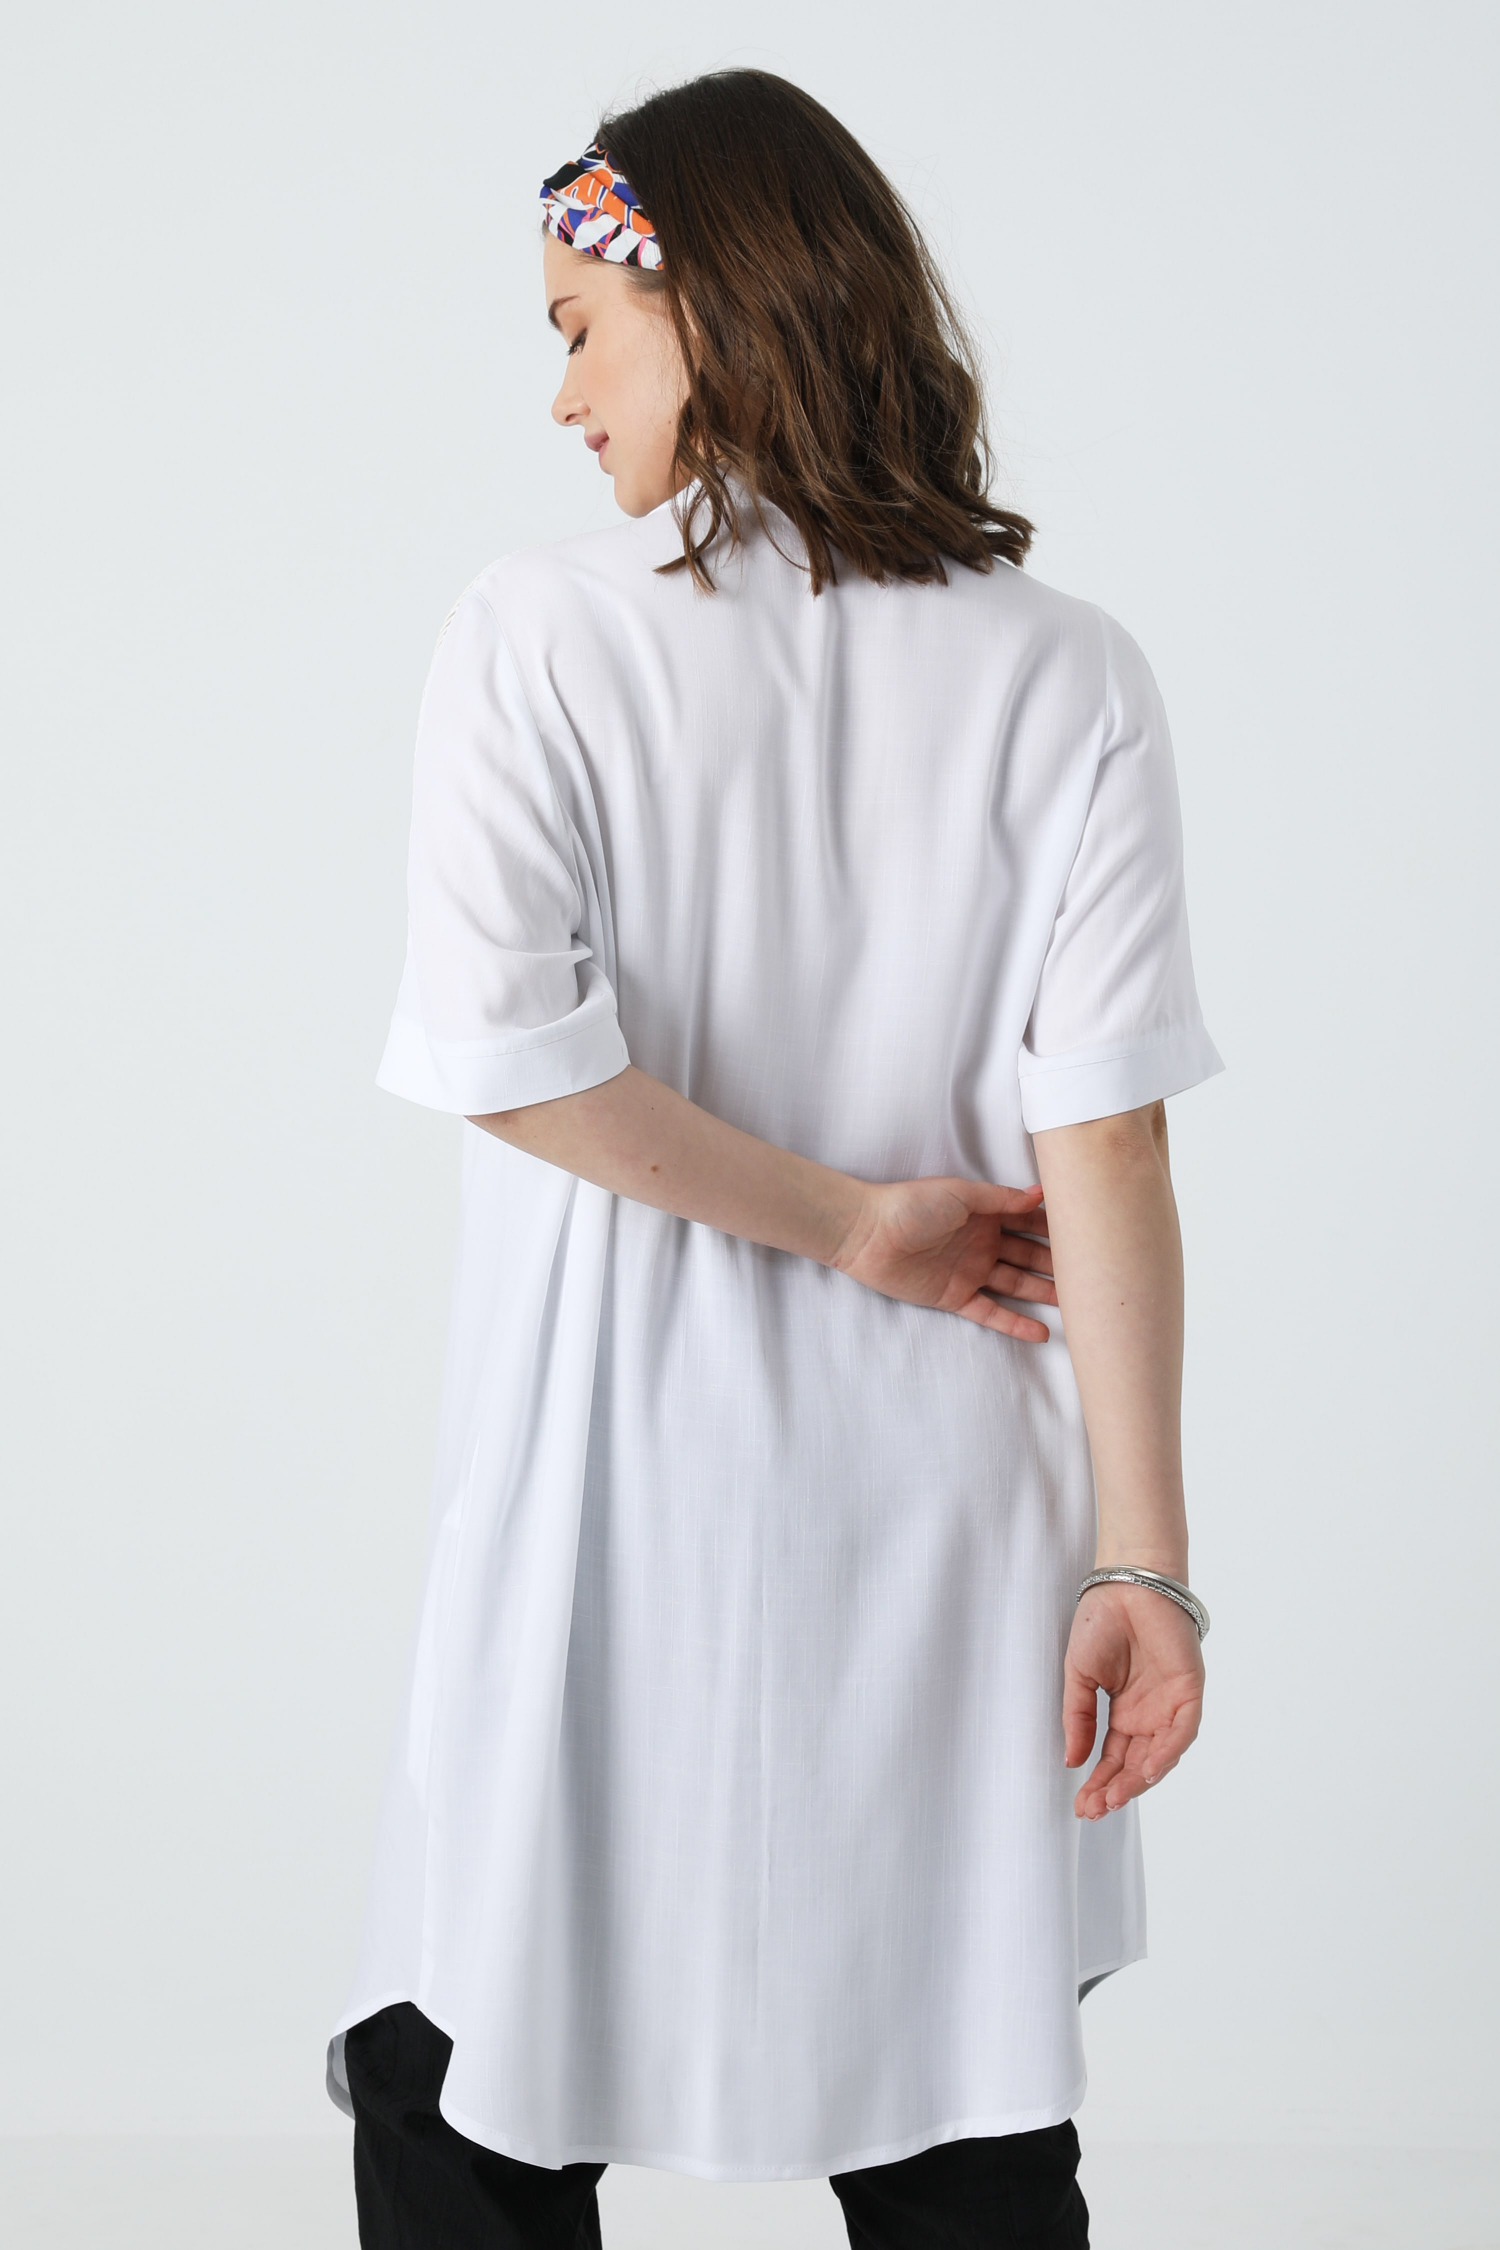 Long shirt with braid (shipping 25/31 March).